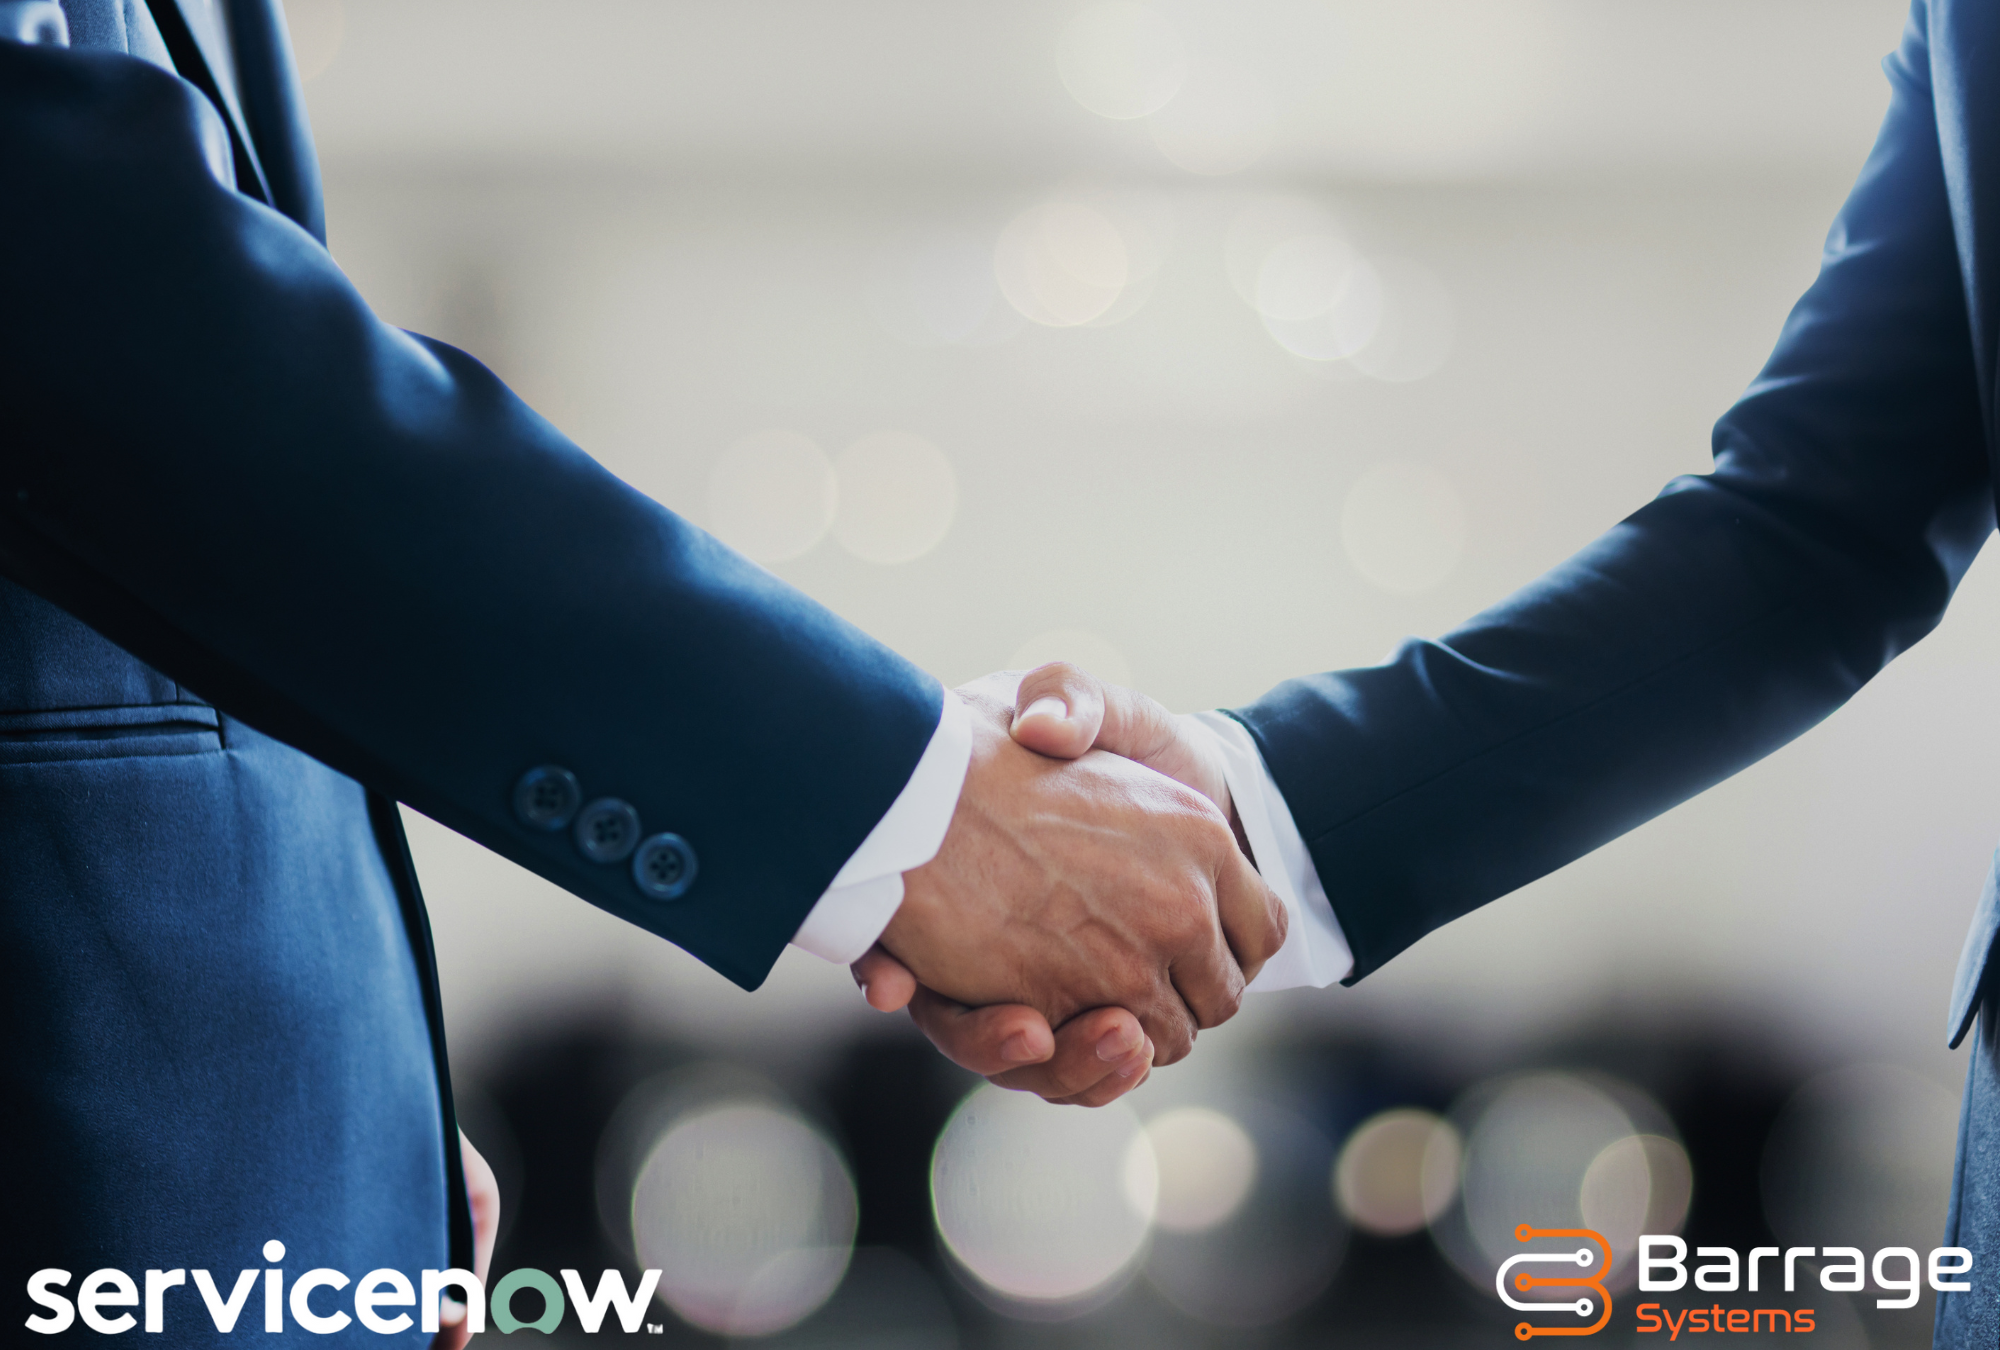 Two professionals in business suits shaking hands, with “ServiceNow” and “Barrage Systems” logos in the background.